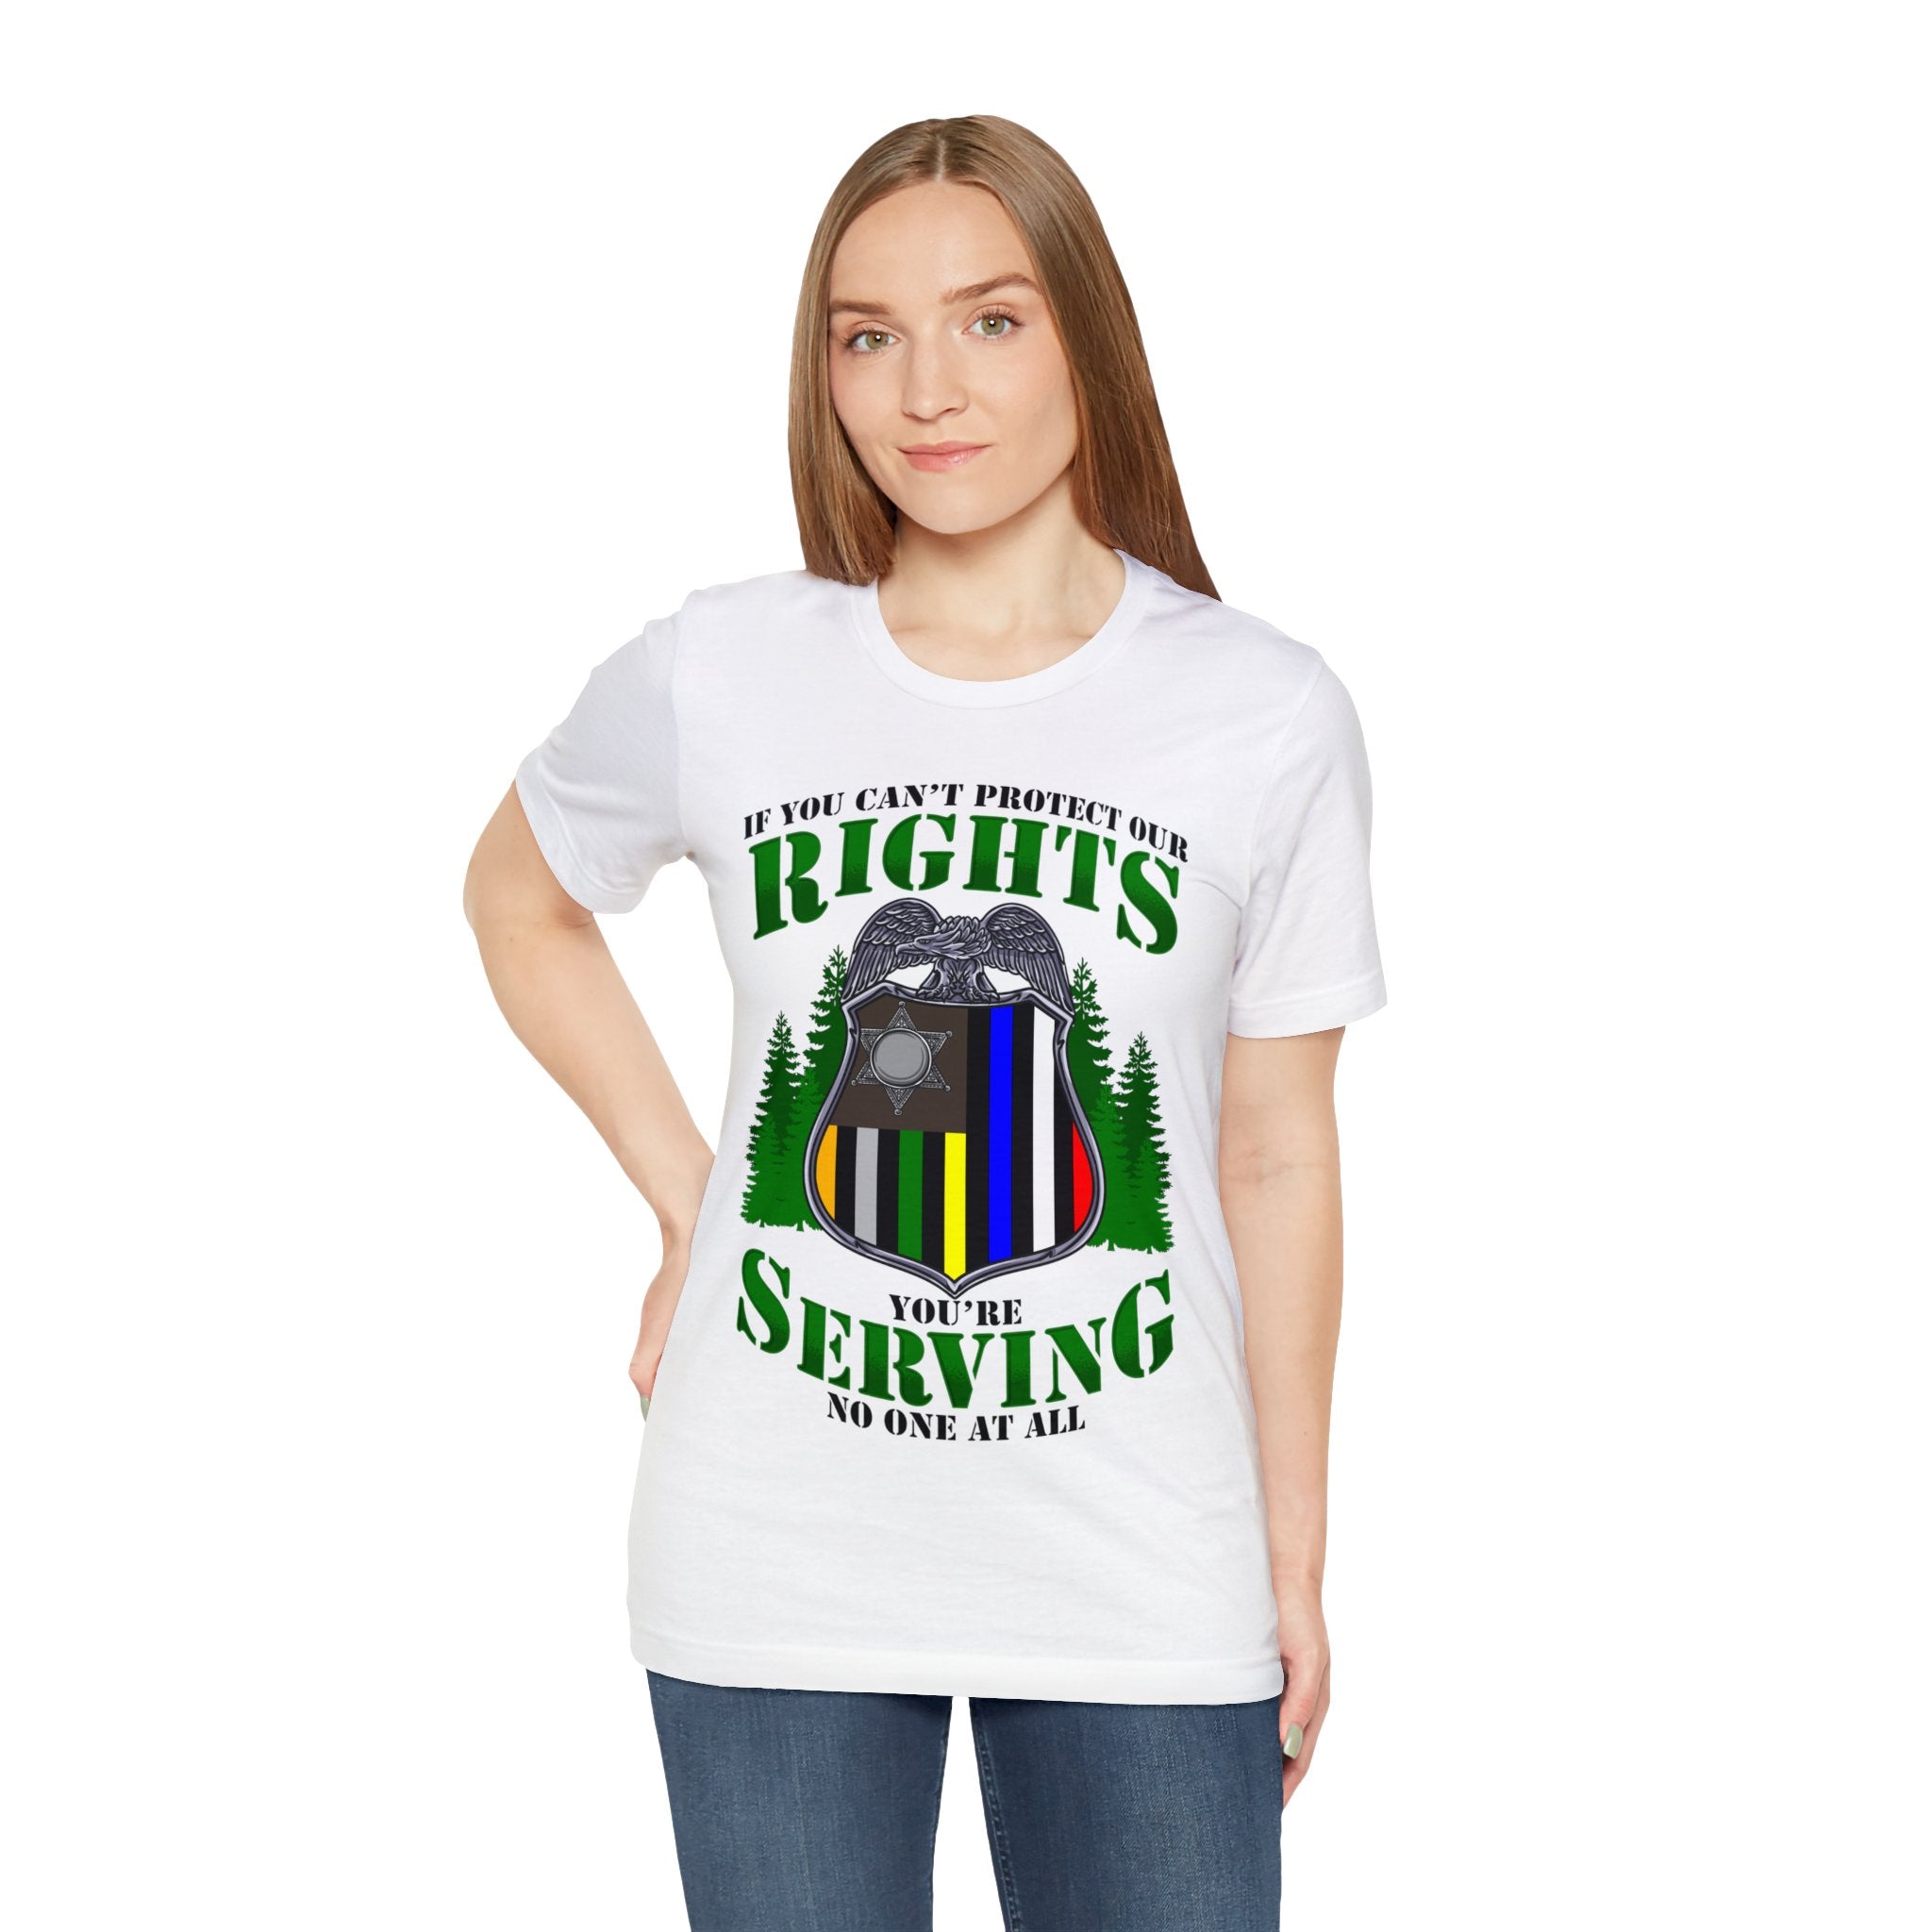 Thin Federal Line Tee - Rights/Serving